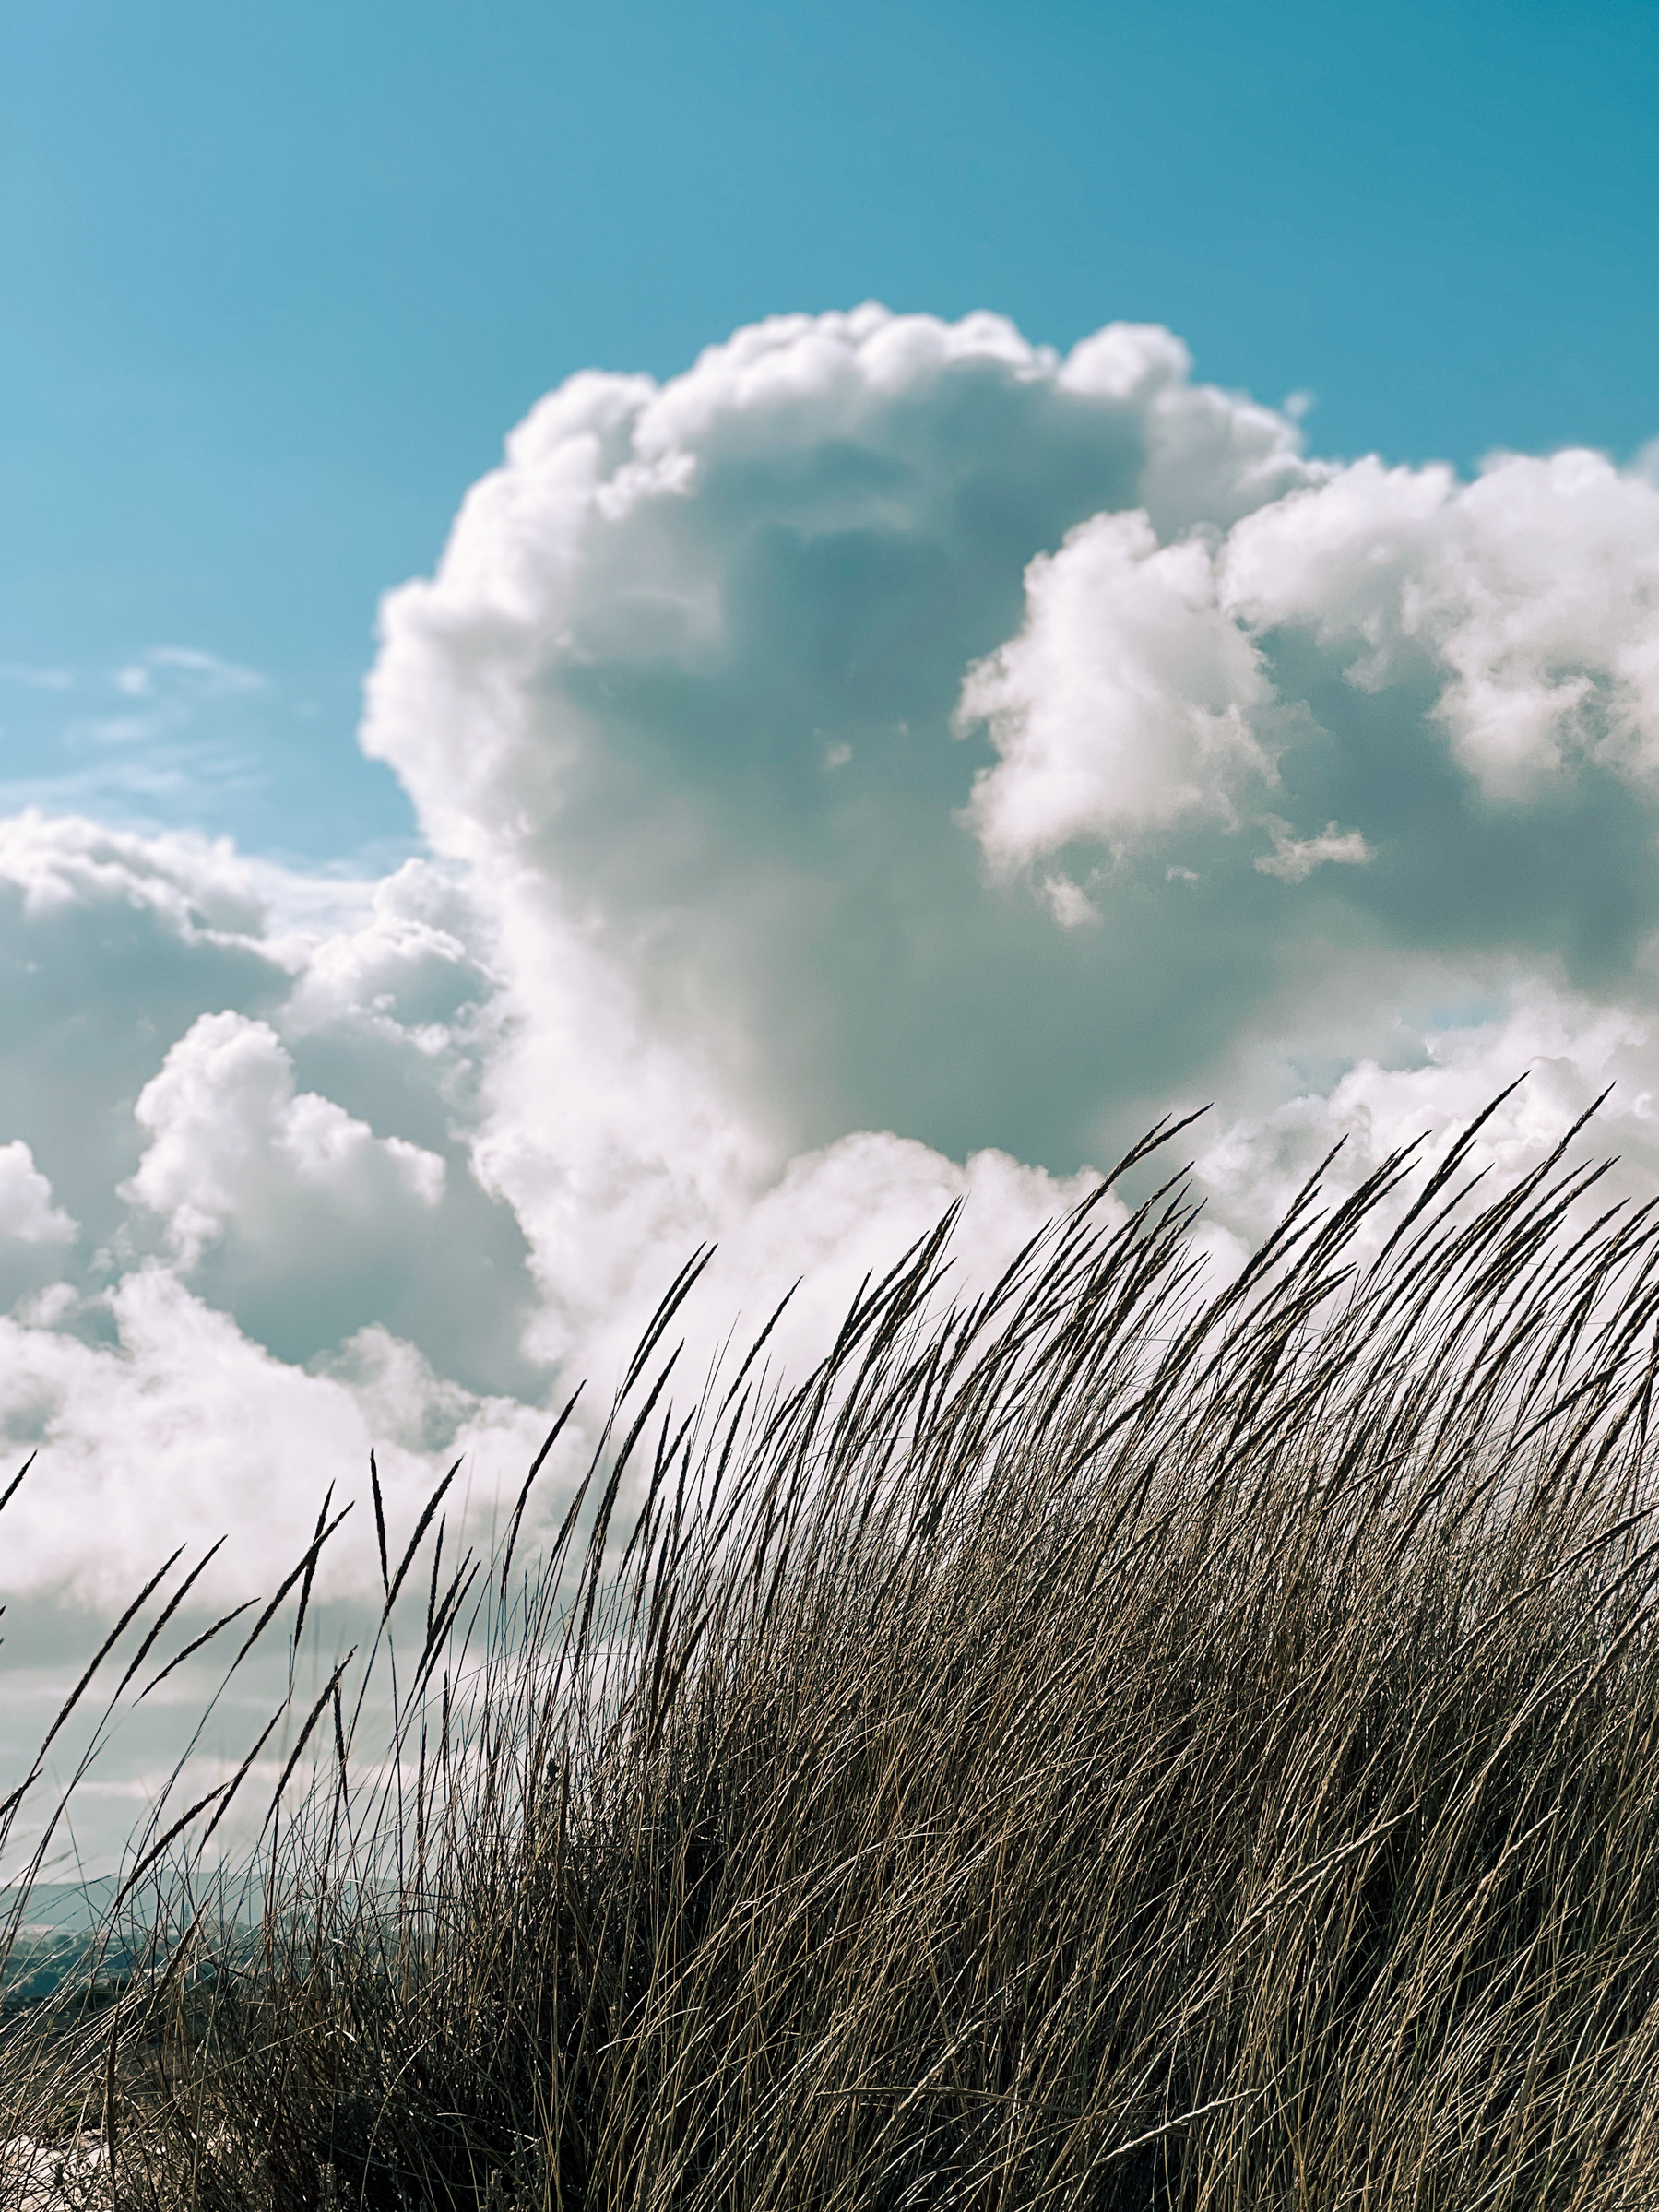 Clouds and beach vegetation. 